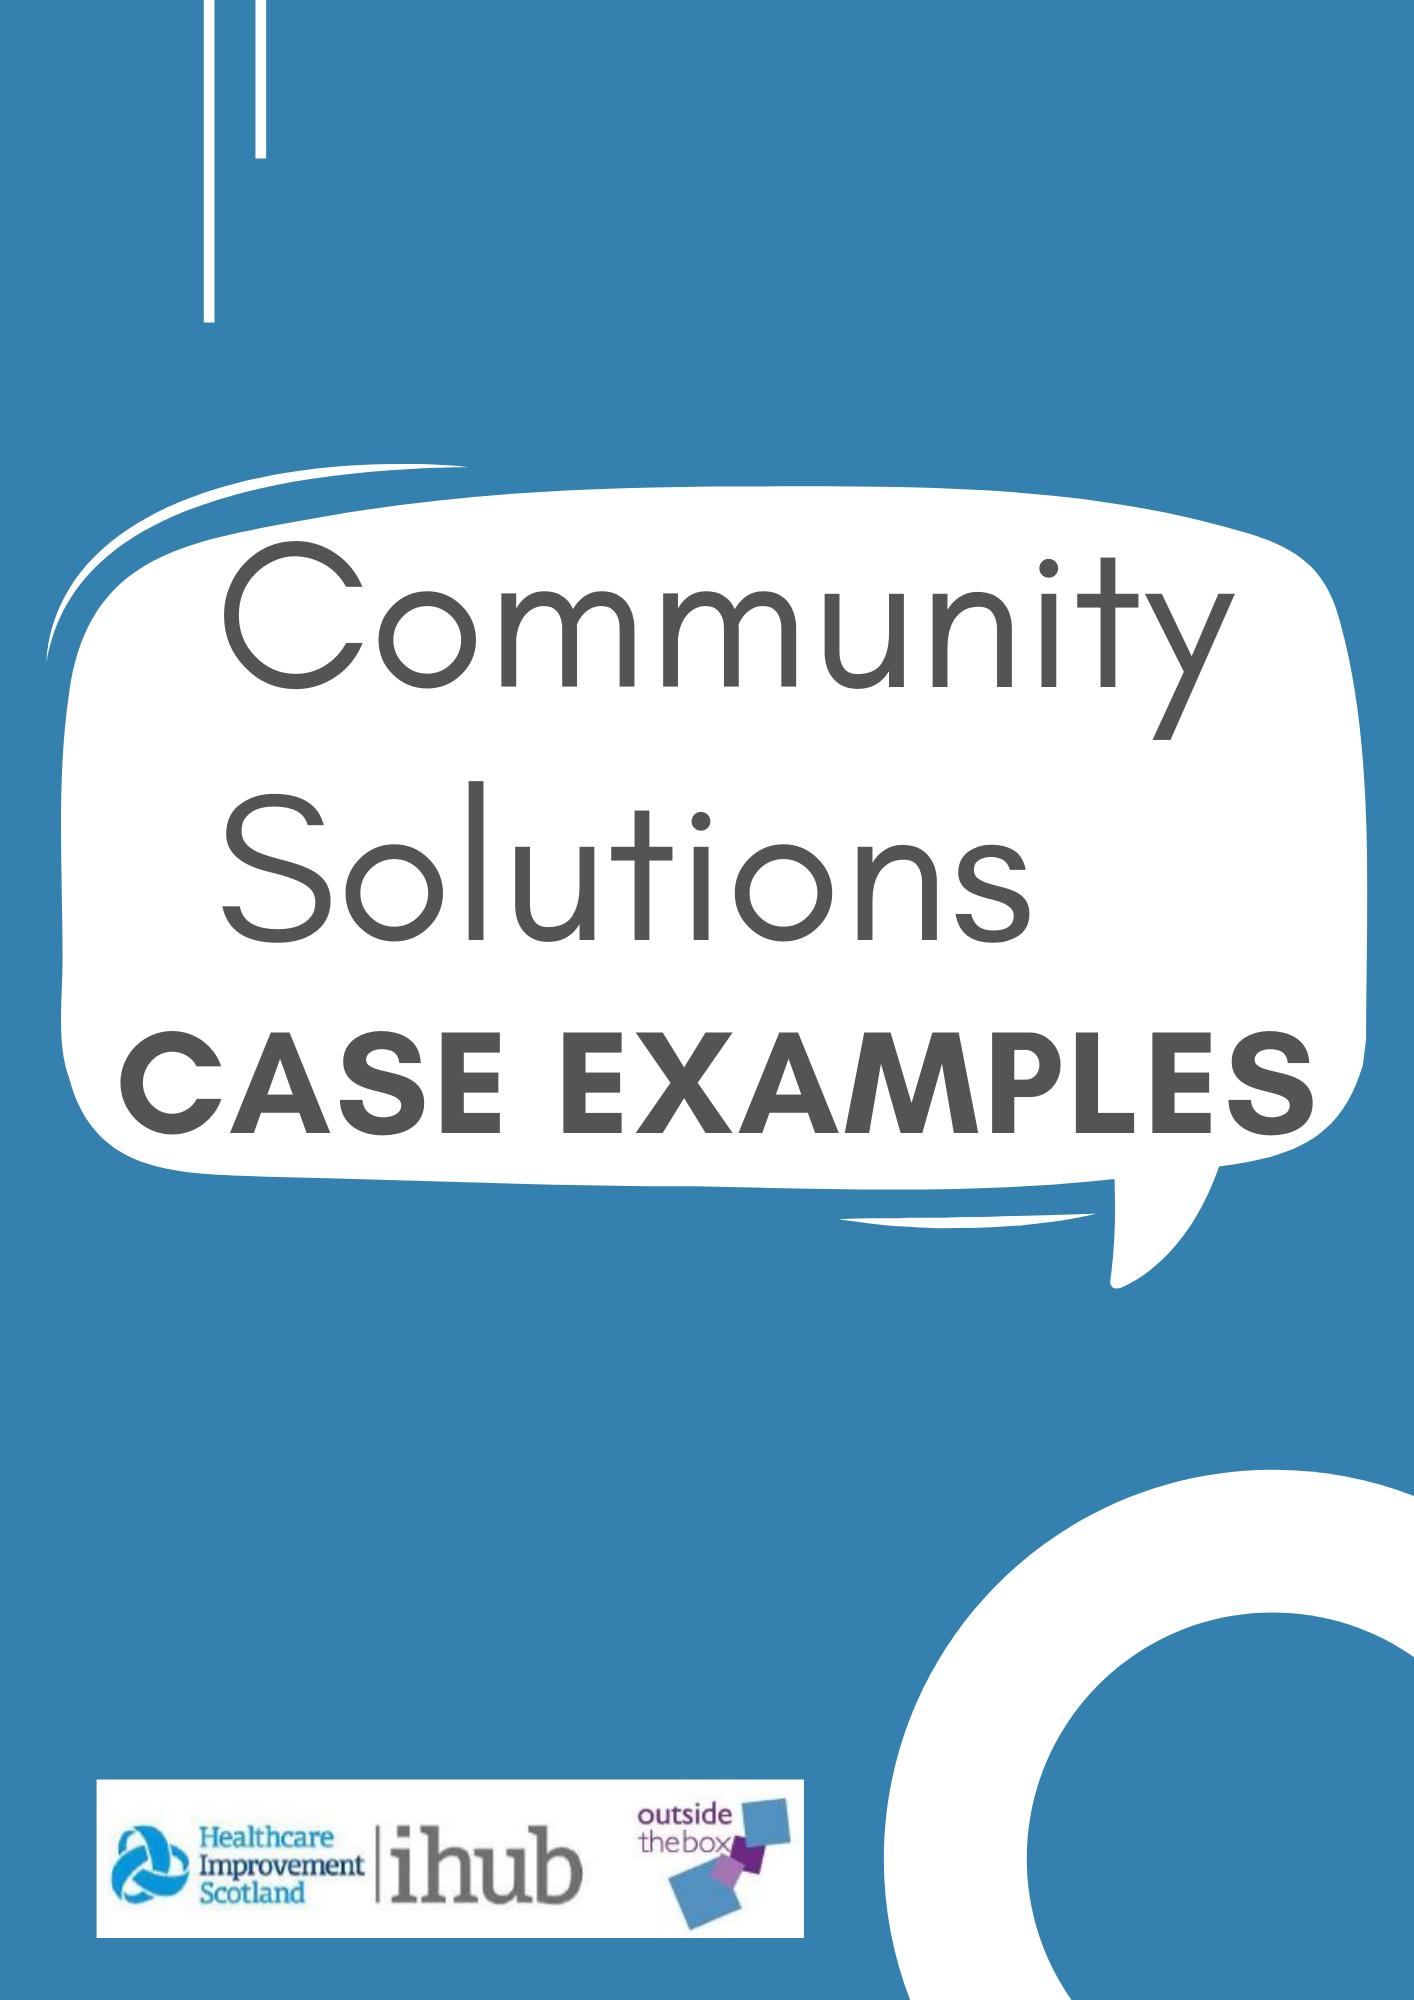 Community Solutions case examples